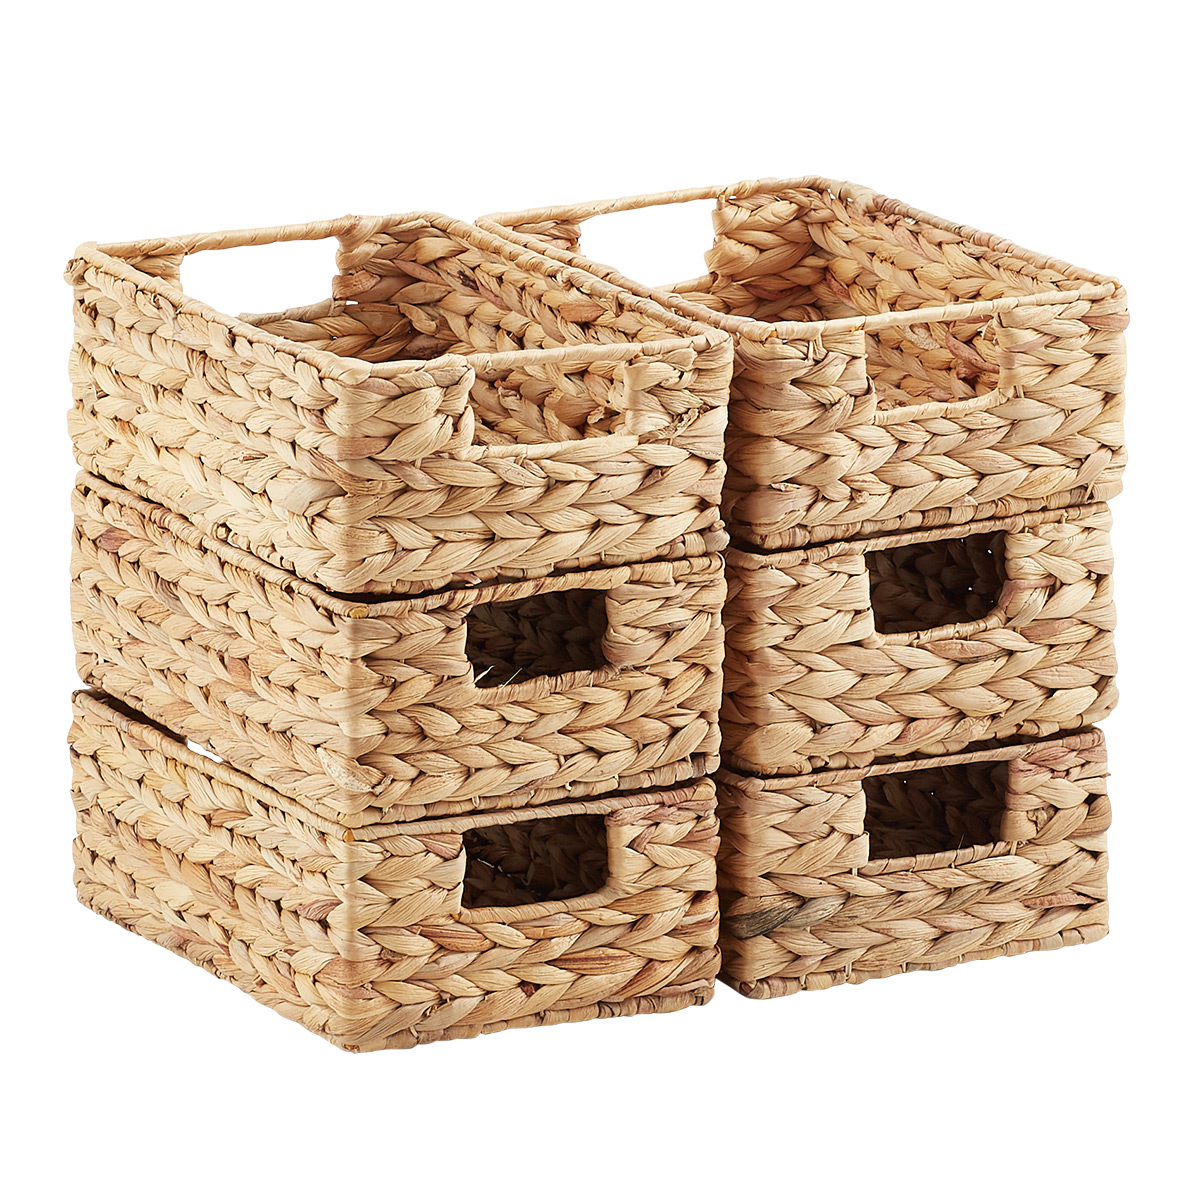 DINGTAI Seagrass Storage Baskets with Labels, 10.5x9x7.5in Wicker Storage Basket, 4 Pack Woven Storage Baskets, Pantry Baskets Organization,Vintage